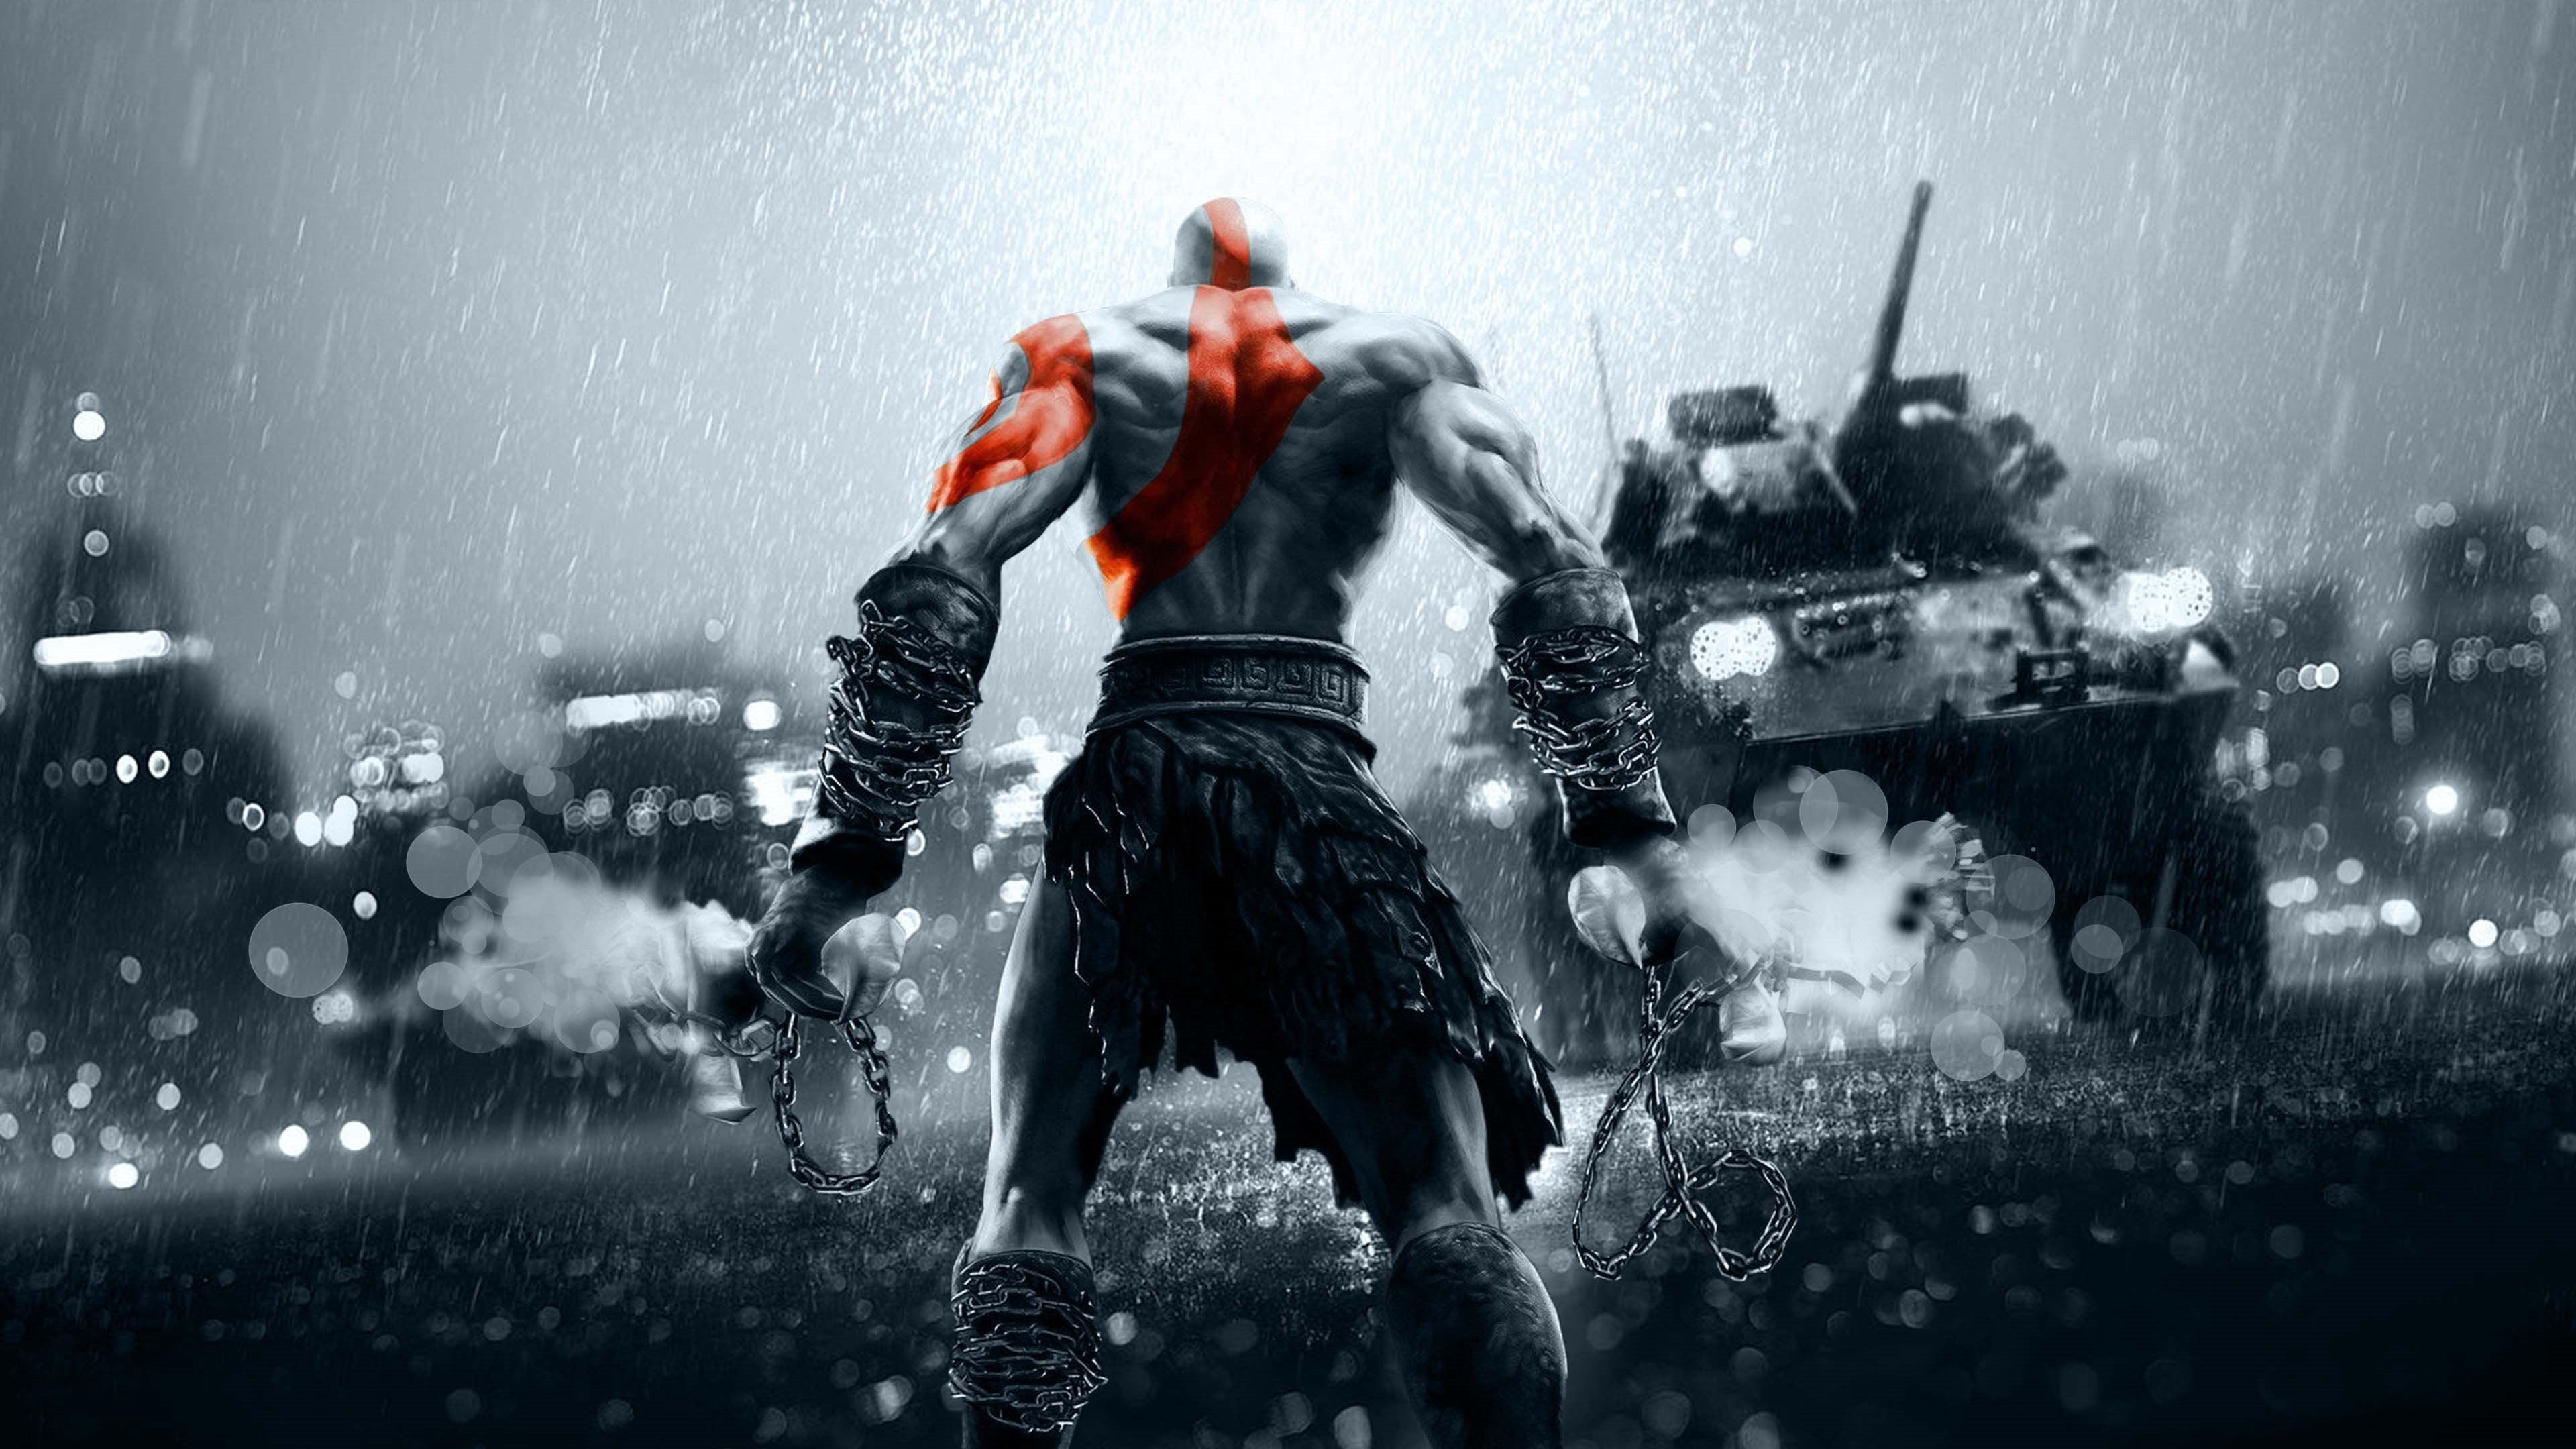 Adventureous Pic From God of War. Gaming wallpaper hd, 4k gaming wallpaper, Gaming wallpaper